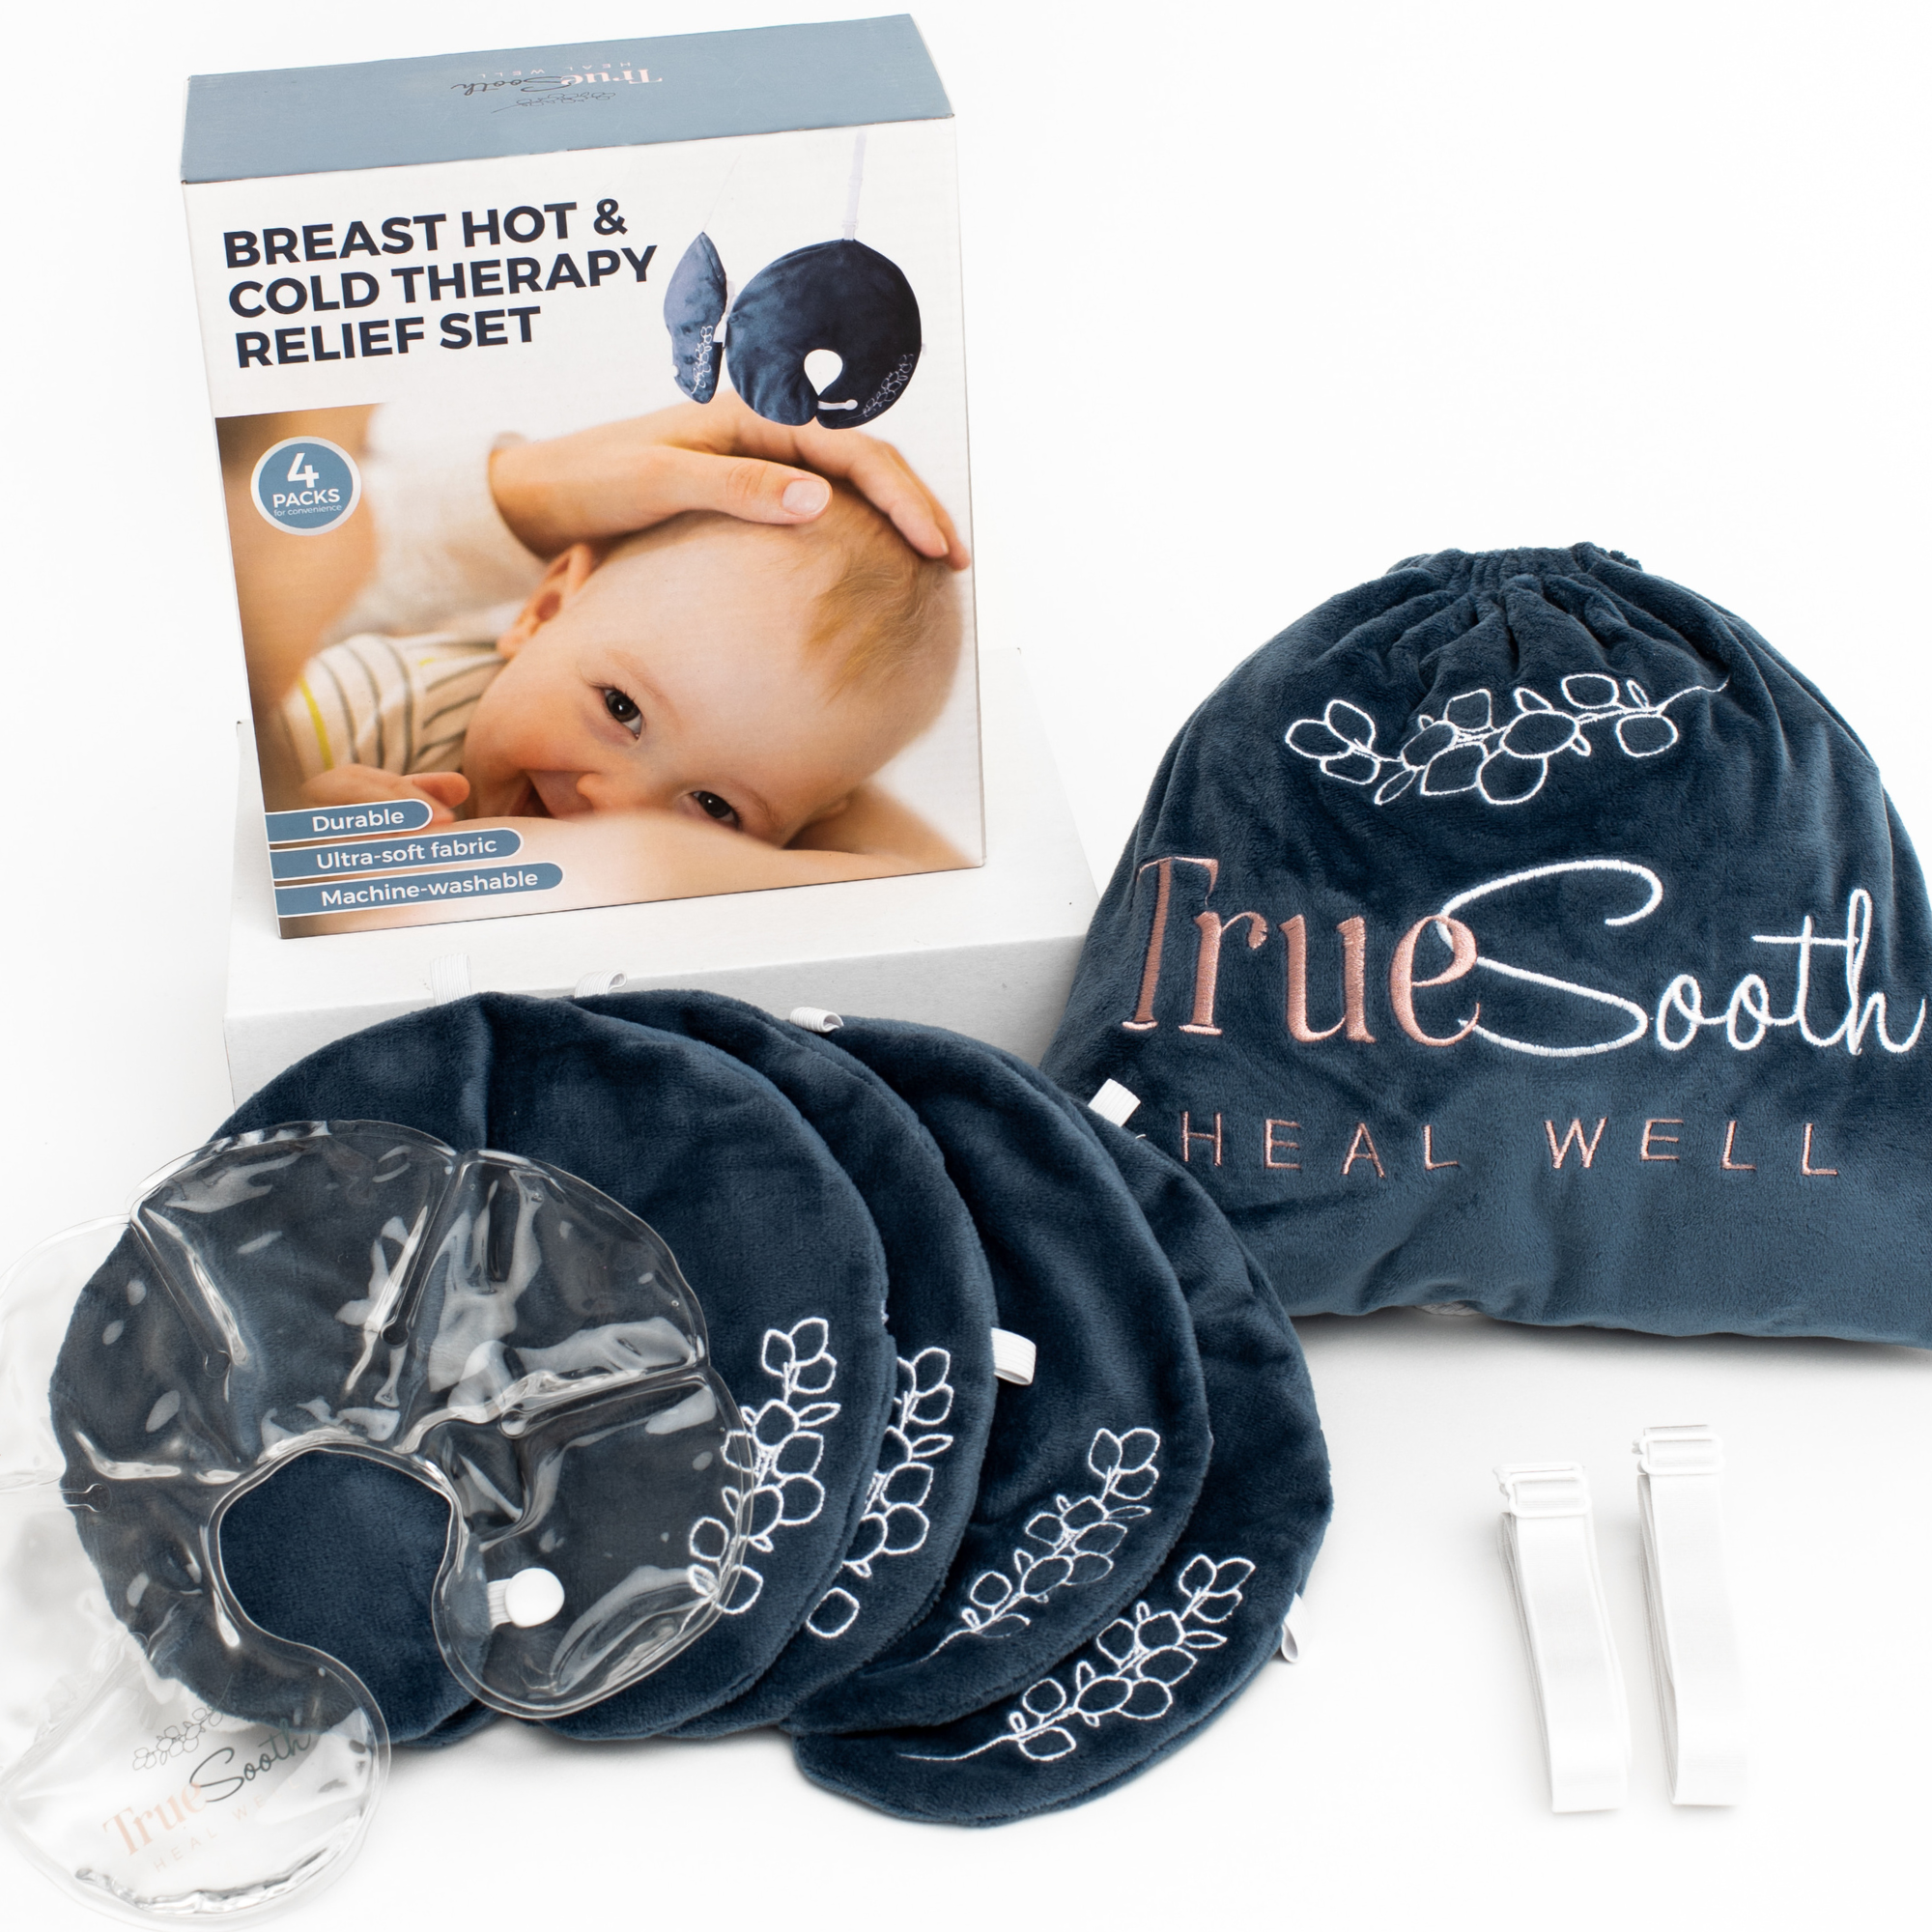 Reusable Breast Ice Packs, Breast Therapy Pack, Breastfeeding Essentials,  for Breastfeeding Relief, Engorgement, Swelling Augmentation, Mastitis